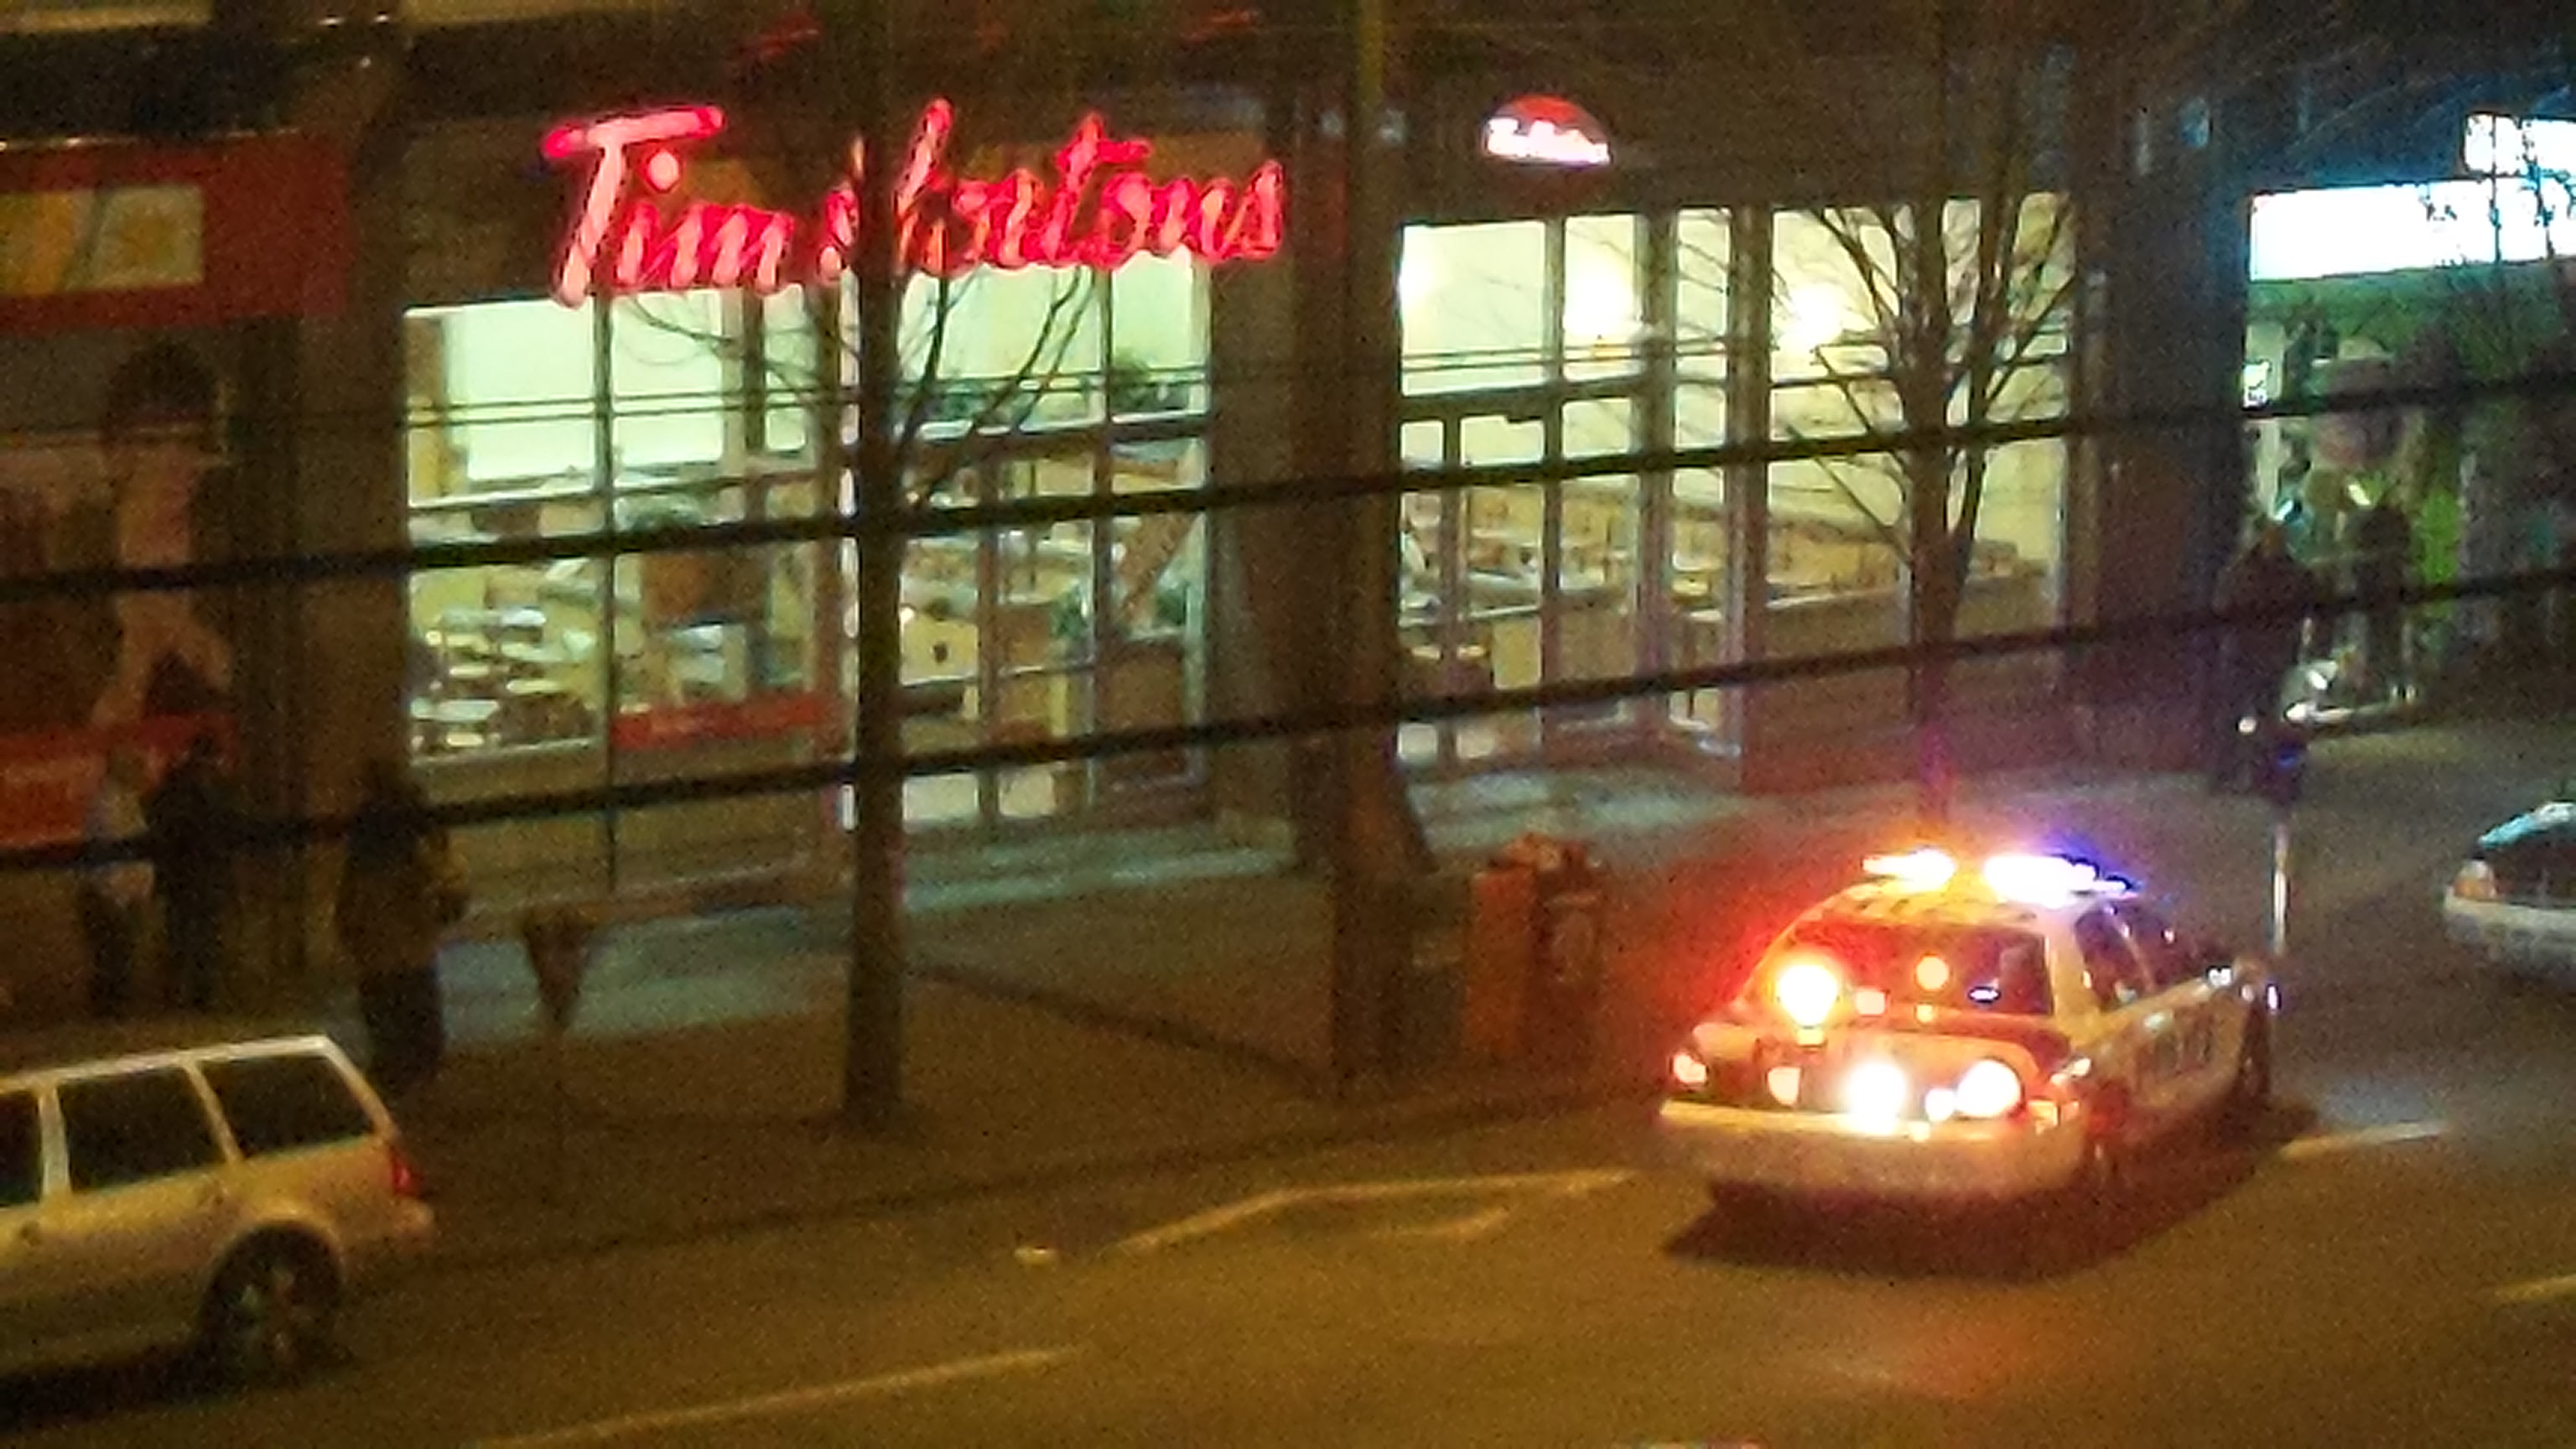 out side my hotel down town Vancouver ,there were up to 3 cop cars all going in and out of the Tim Hortons